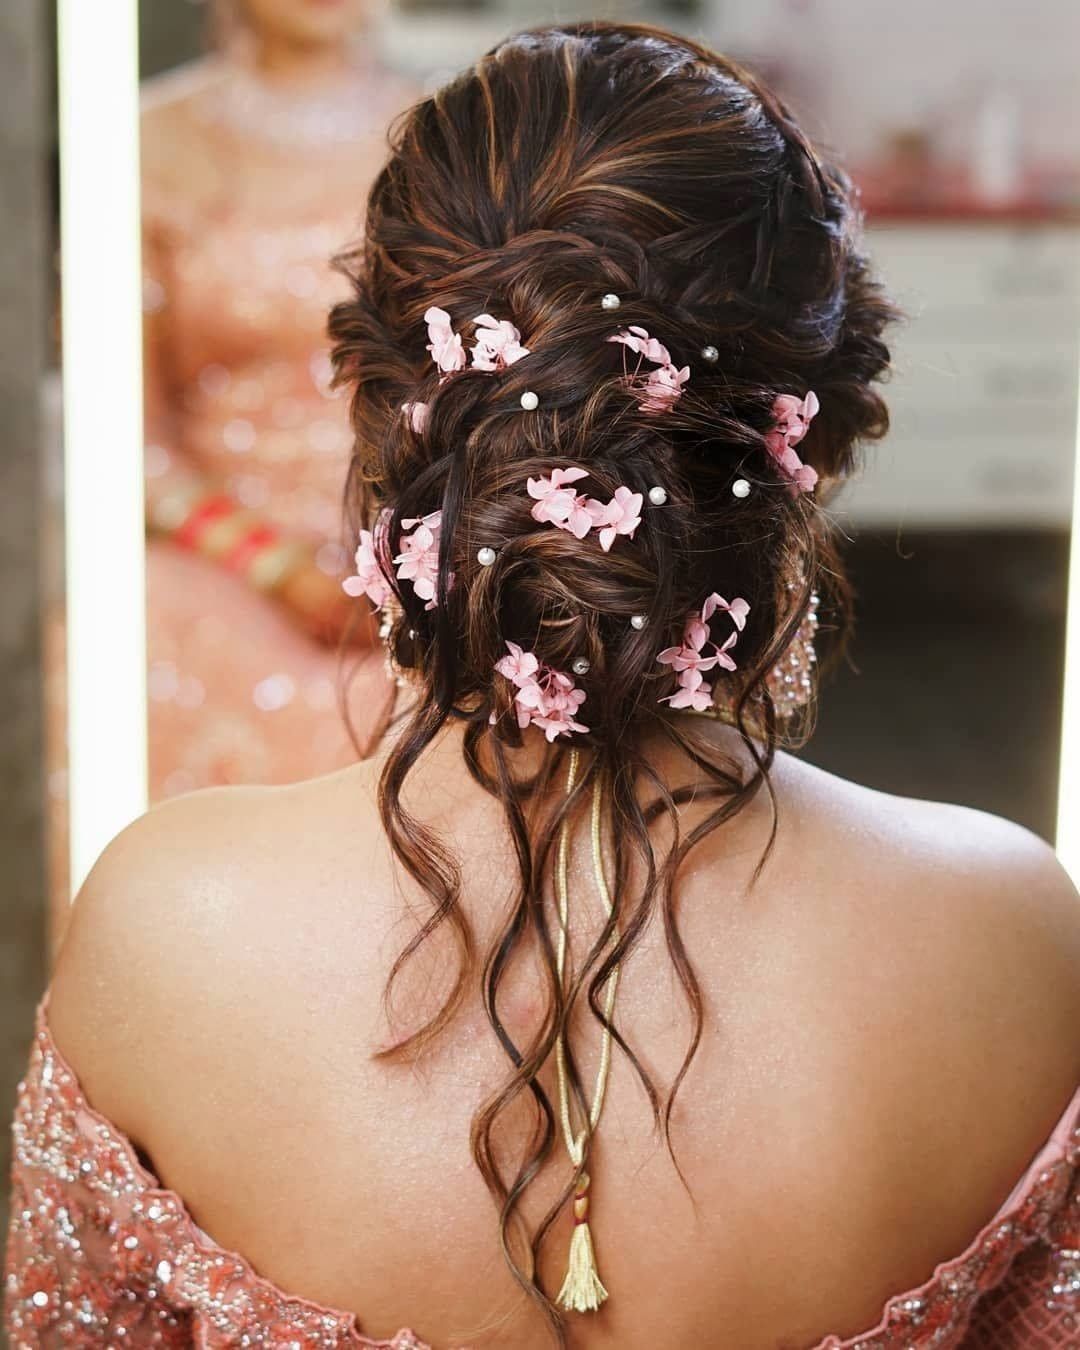 25 Simply Stunning Engagement Hairstyles Perfect for Prewedding Ceremonies   Bridal Look  Wedding Blog